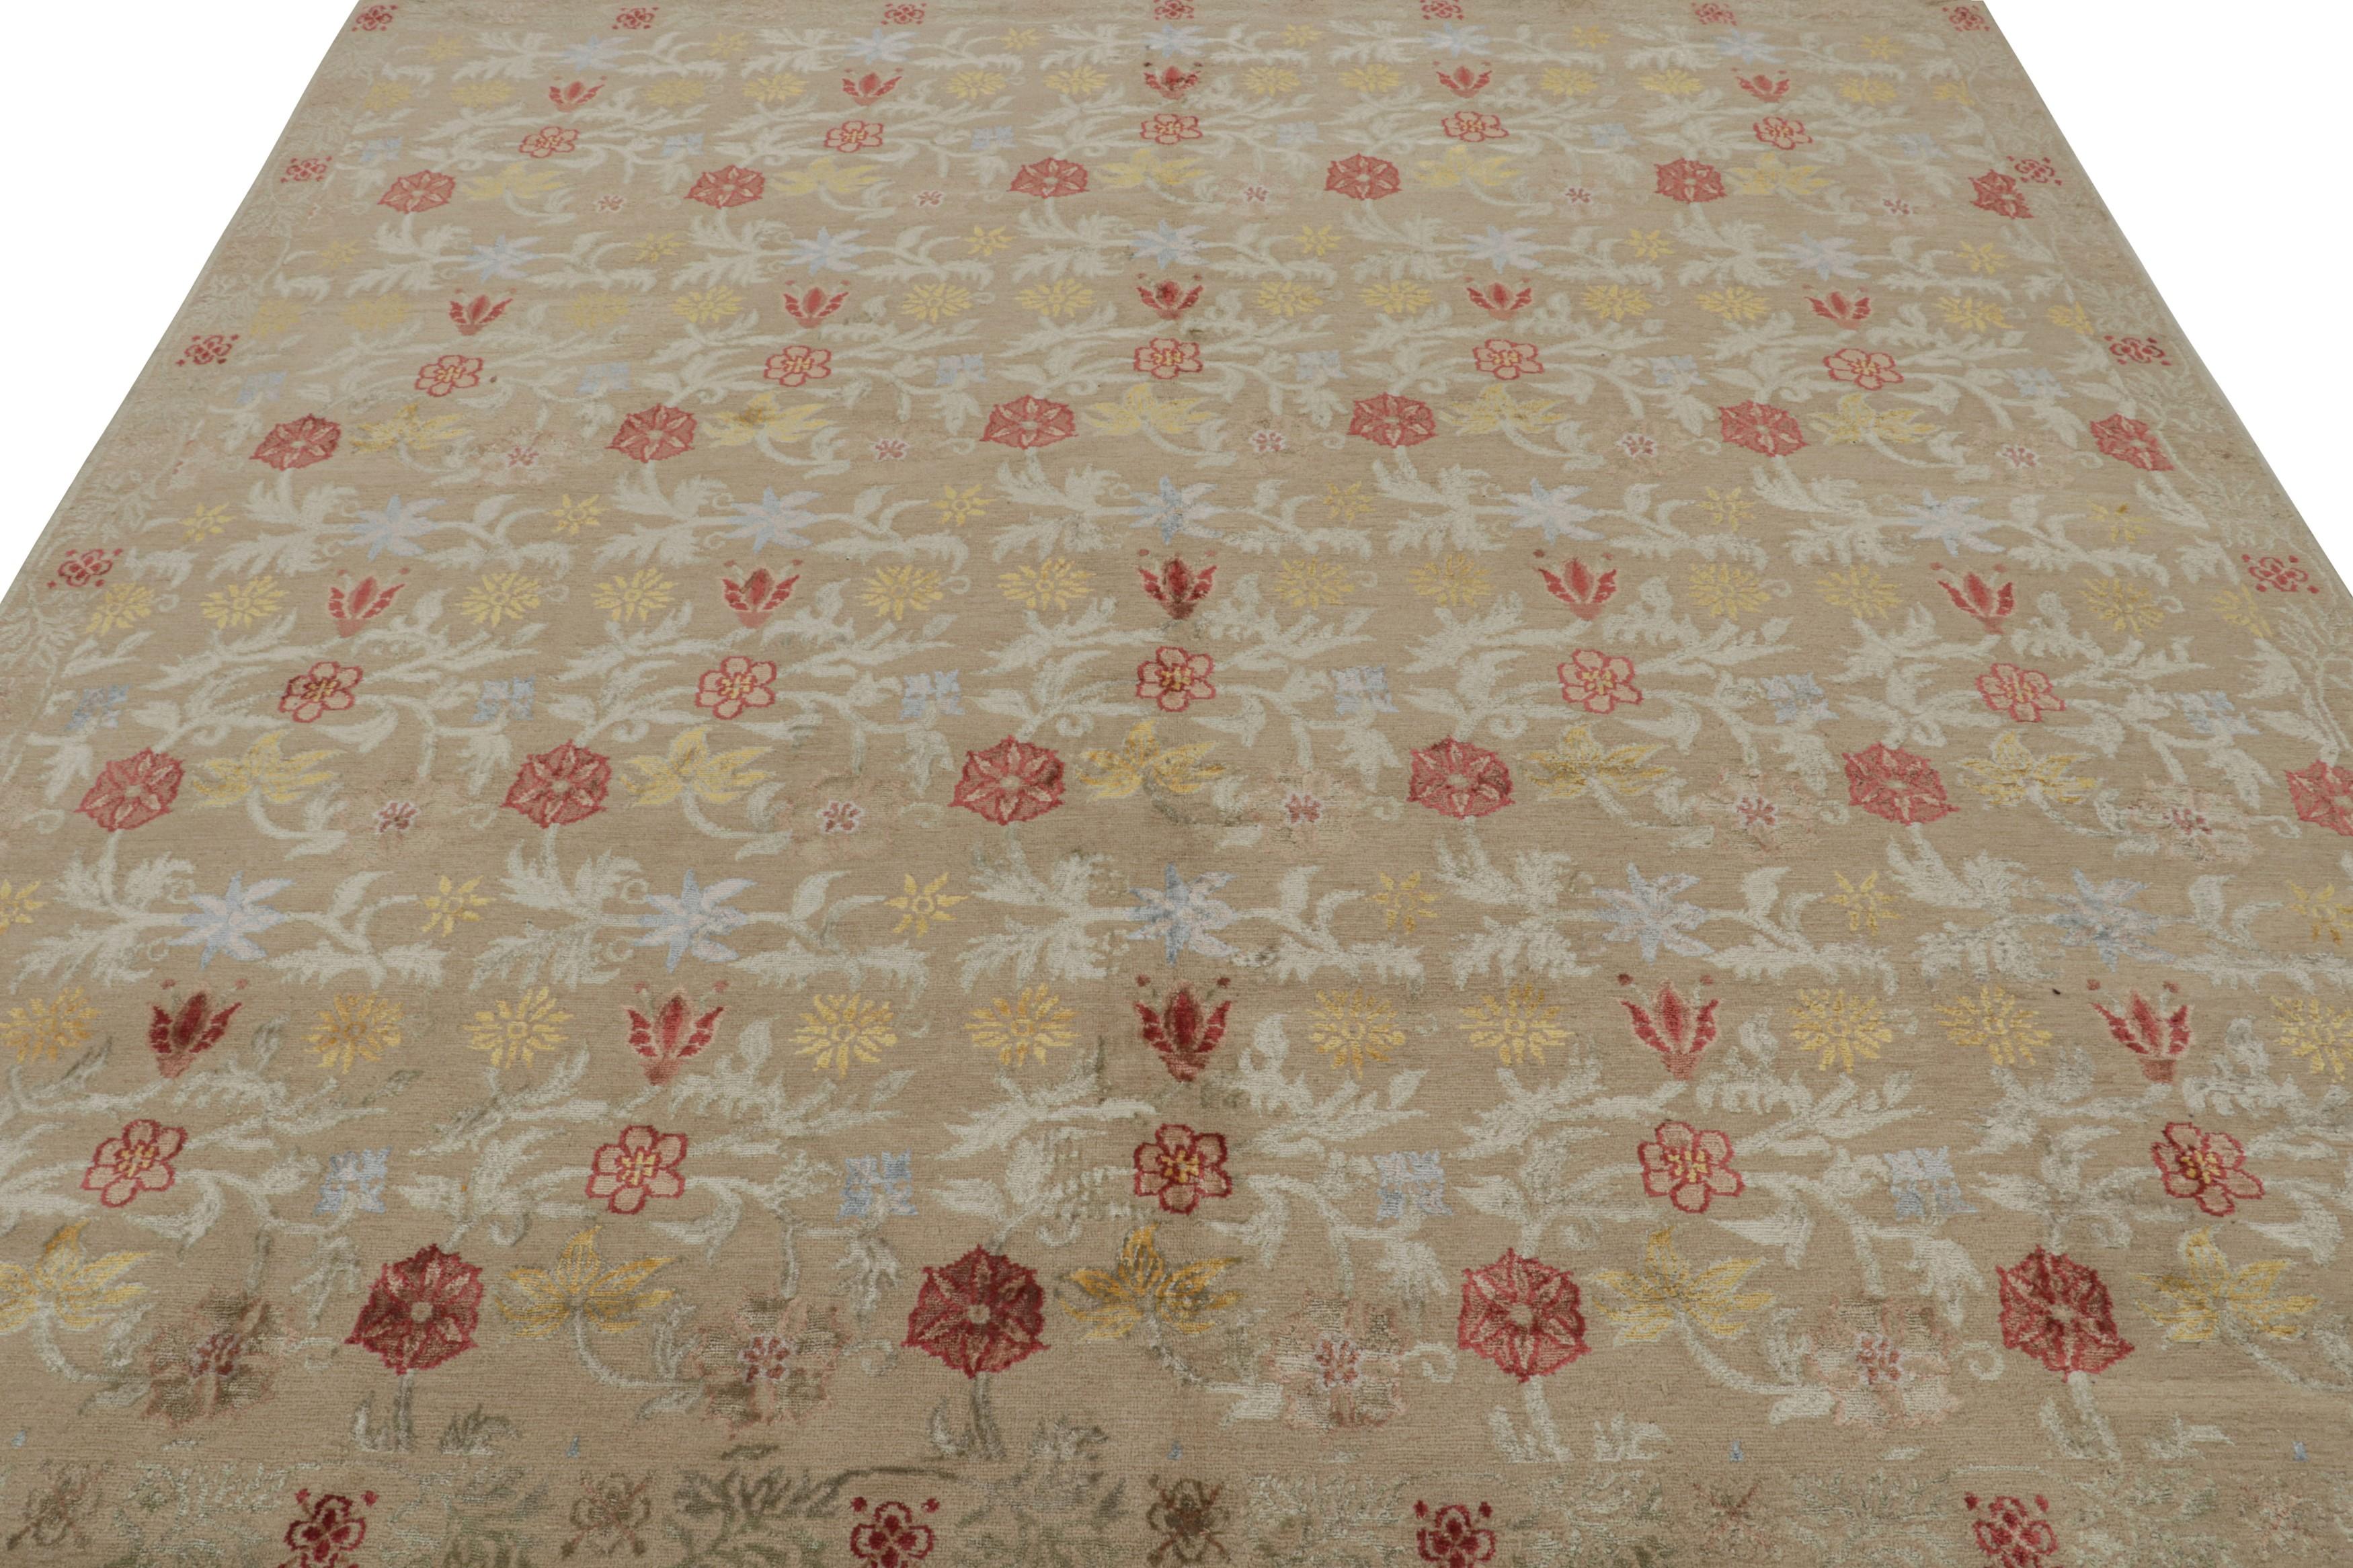 Nepalese Rug & Kilim’s “Bilbao” Spanish Style Rug in Beige with Colorful Floral Patterns For Sale